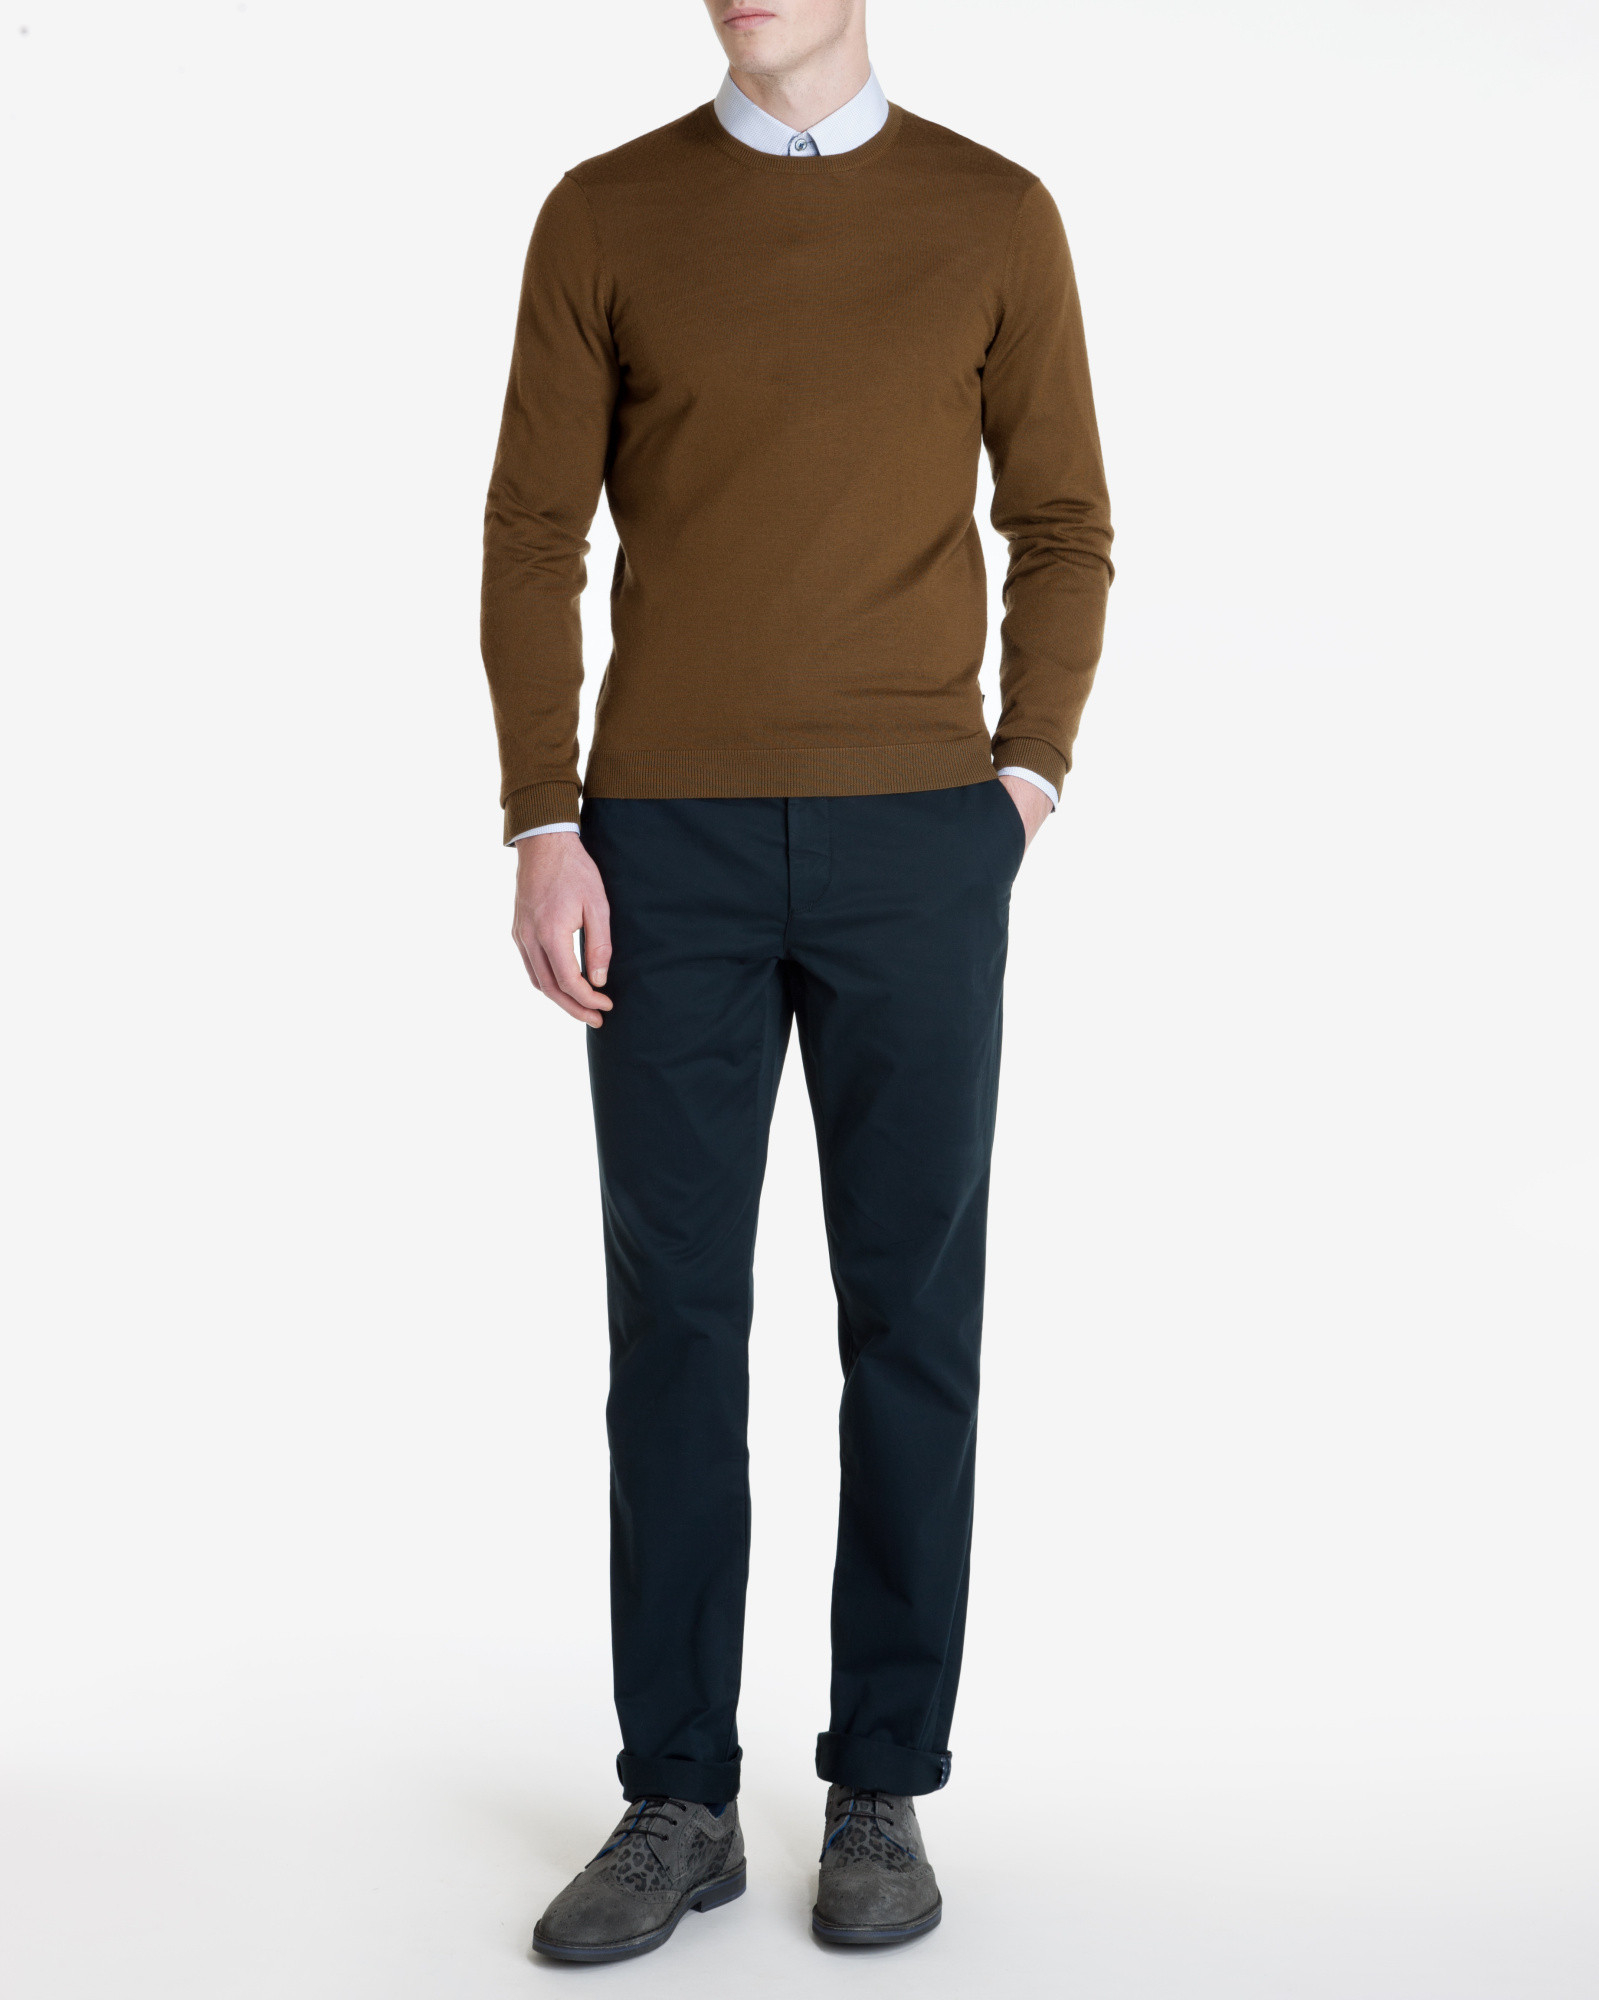 Lyst - Ted Baker Classic Fit Chinos in Blue for Men